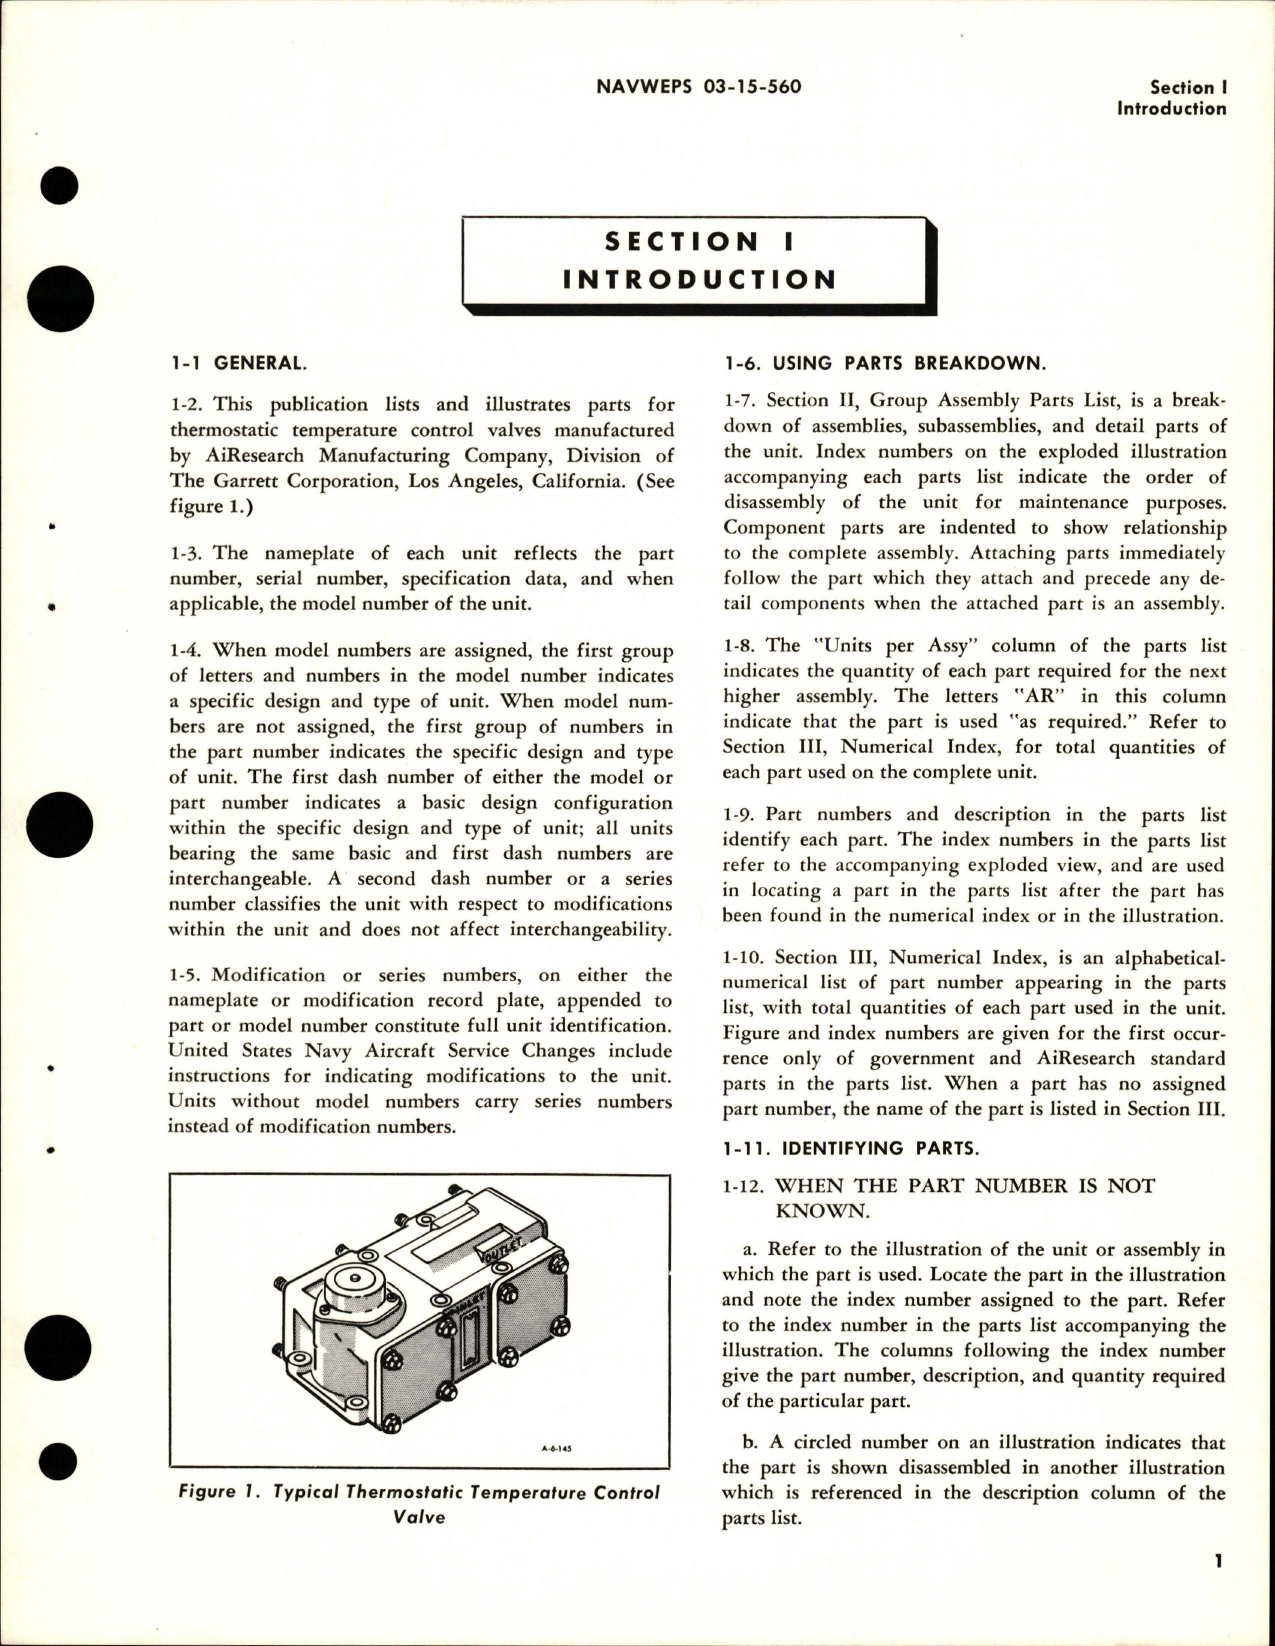 Sample page 5 from AirCorps Library document: Illustrated Parts Breakdown for Thermostatic Temperature Control Valves